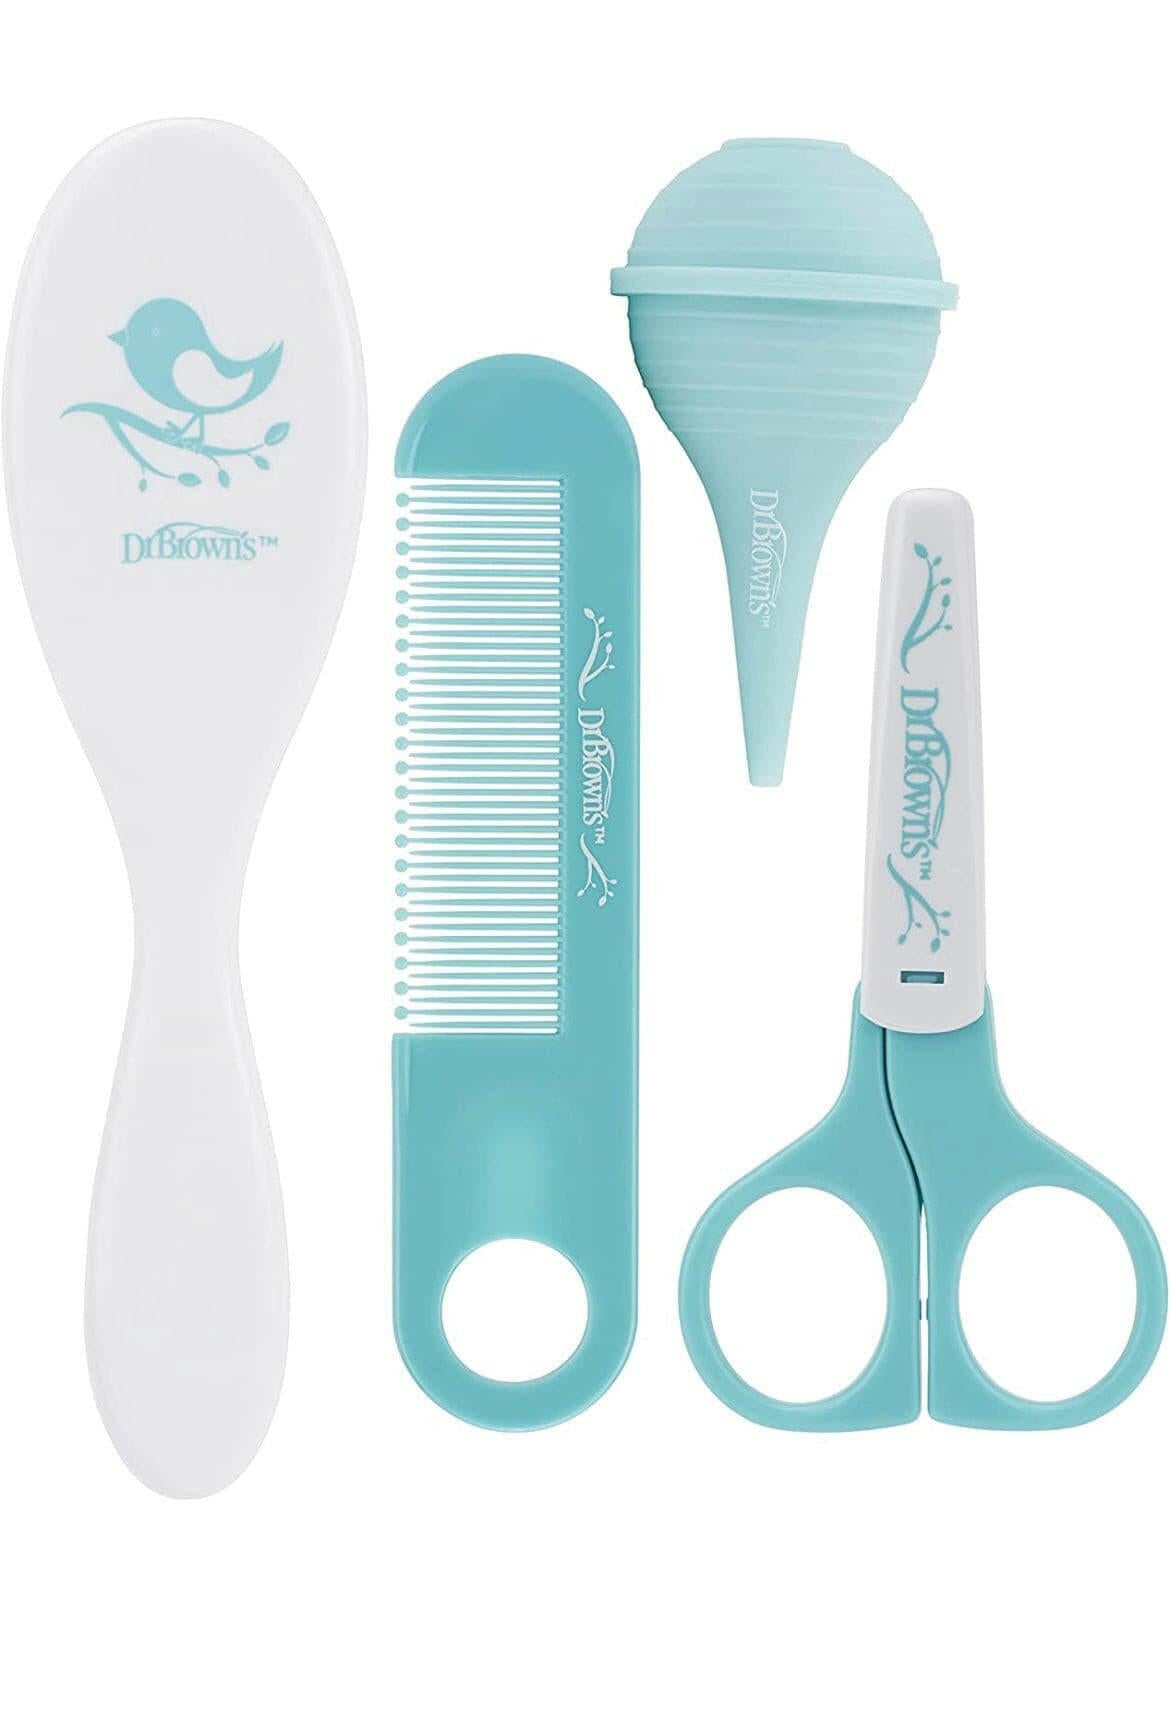 Baby Care Set with Soft Brush, Gentle Comb, Nasal Aspirator and Rounded-Tip Scissors by Dr. Brown.